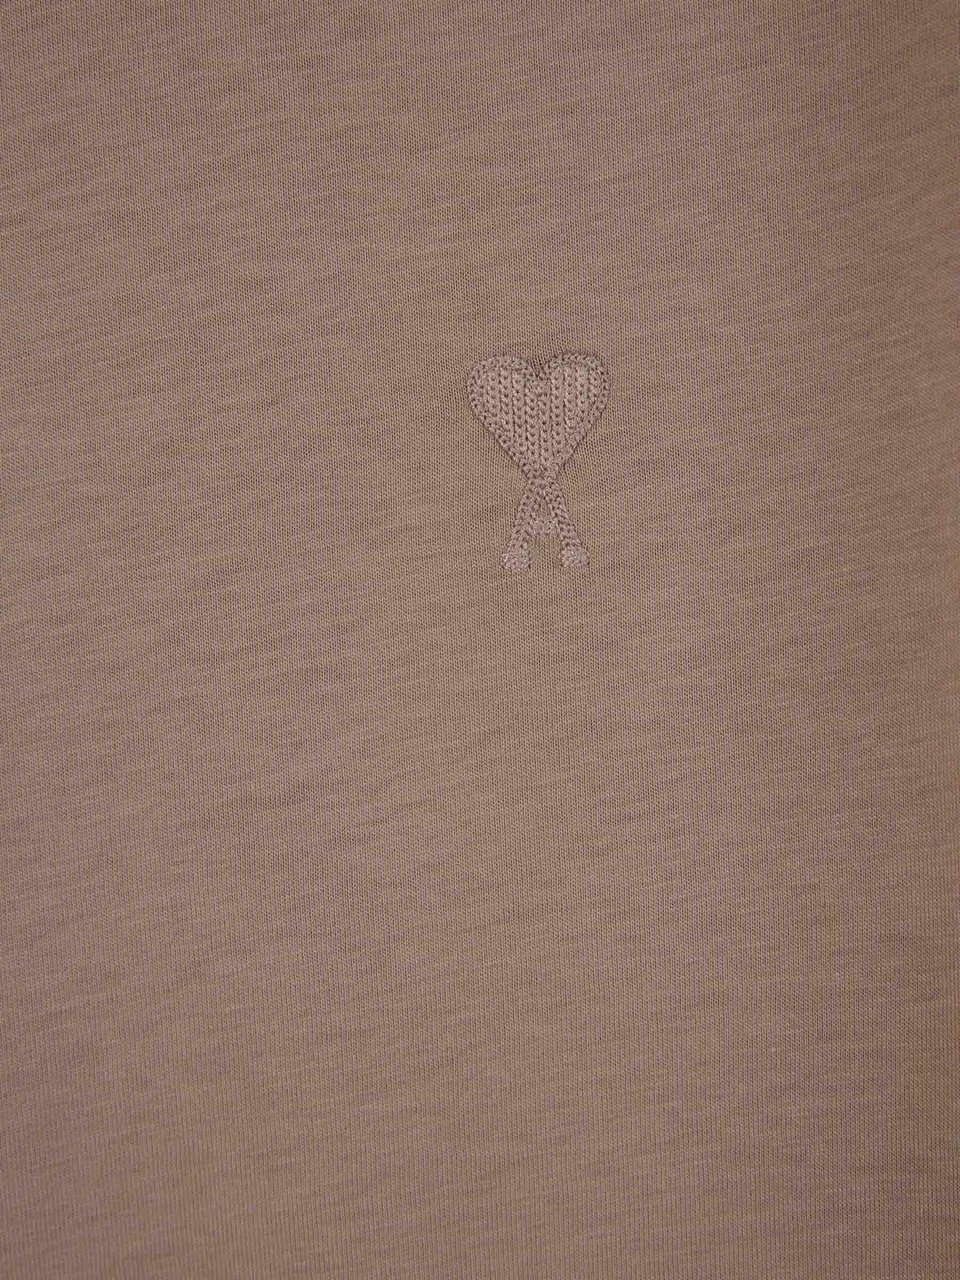 AMI Paris Embroidered Cotton T-Shirt Taupe